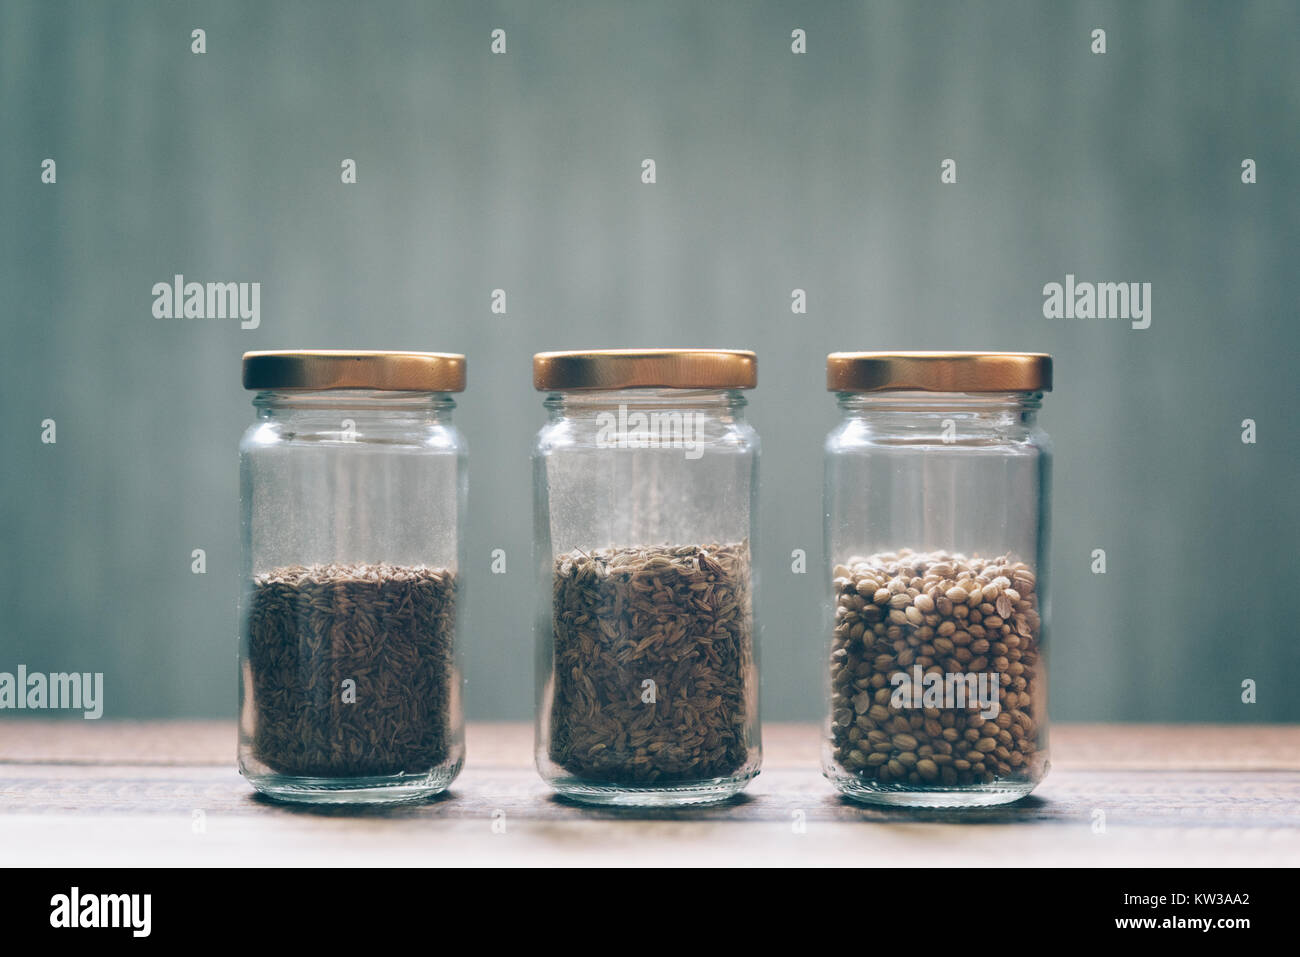 Download Cumin Seeds Jar High Resolution Stock Photography And Images Alamy Yellowimages Mockups